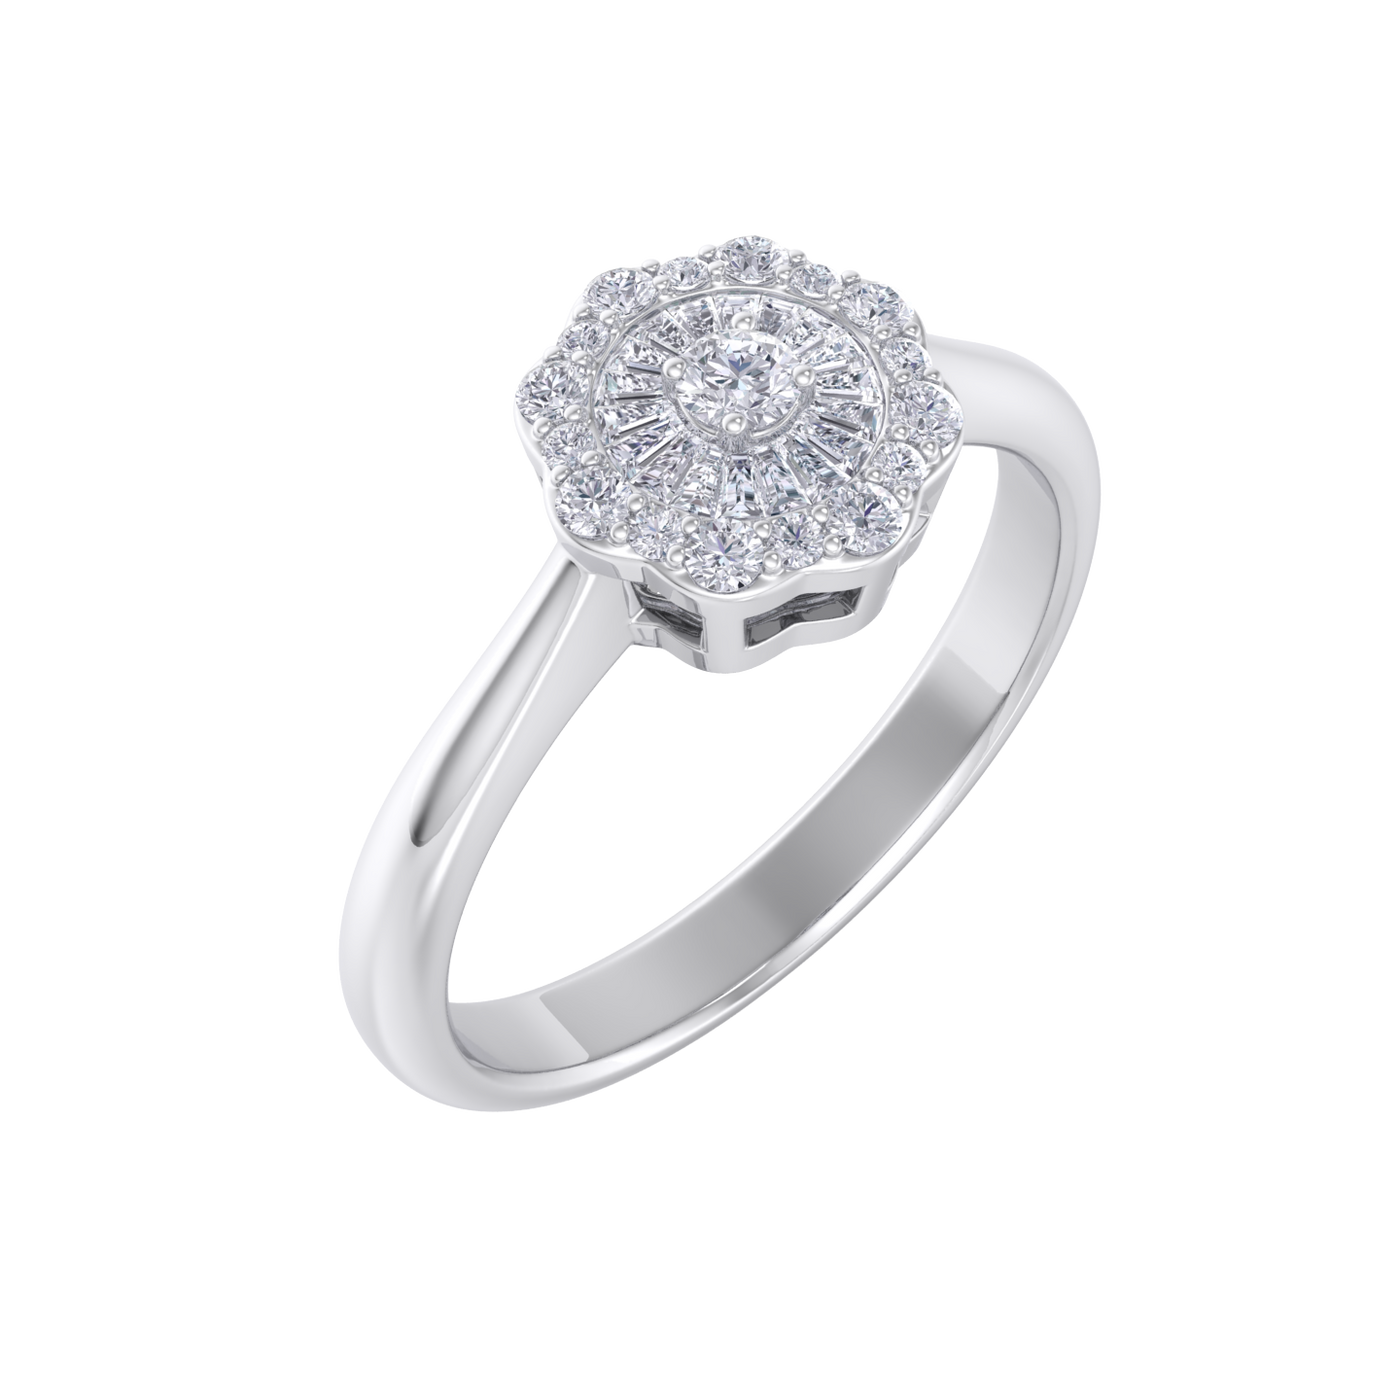 Diamond ring in white gold with white diamonds of 0.32 ct in weight